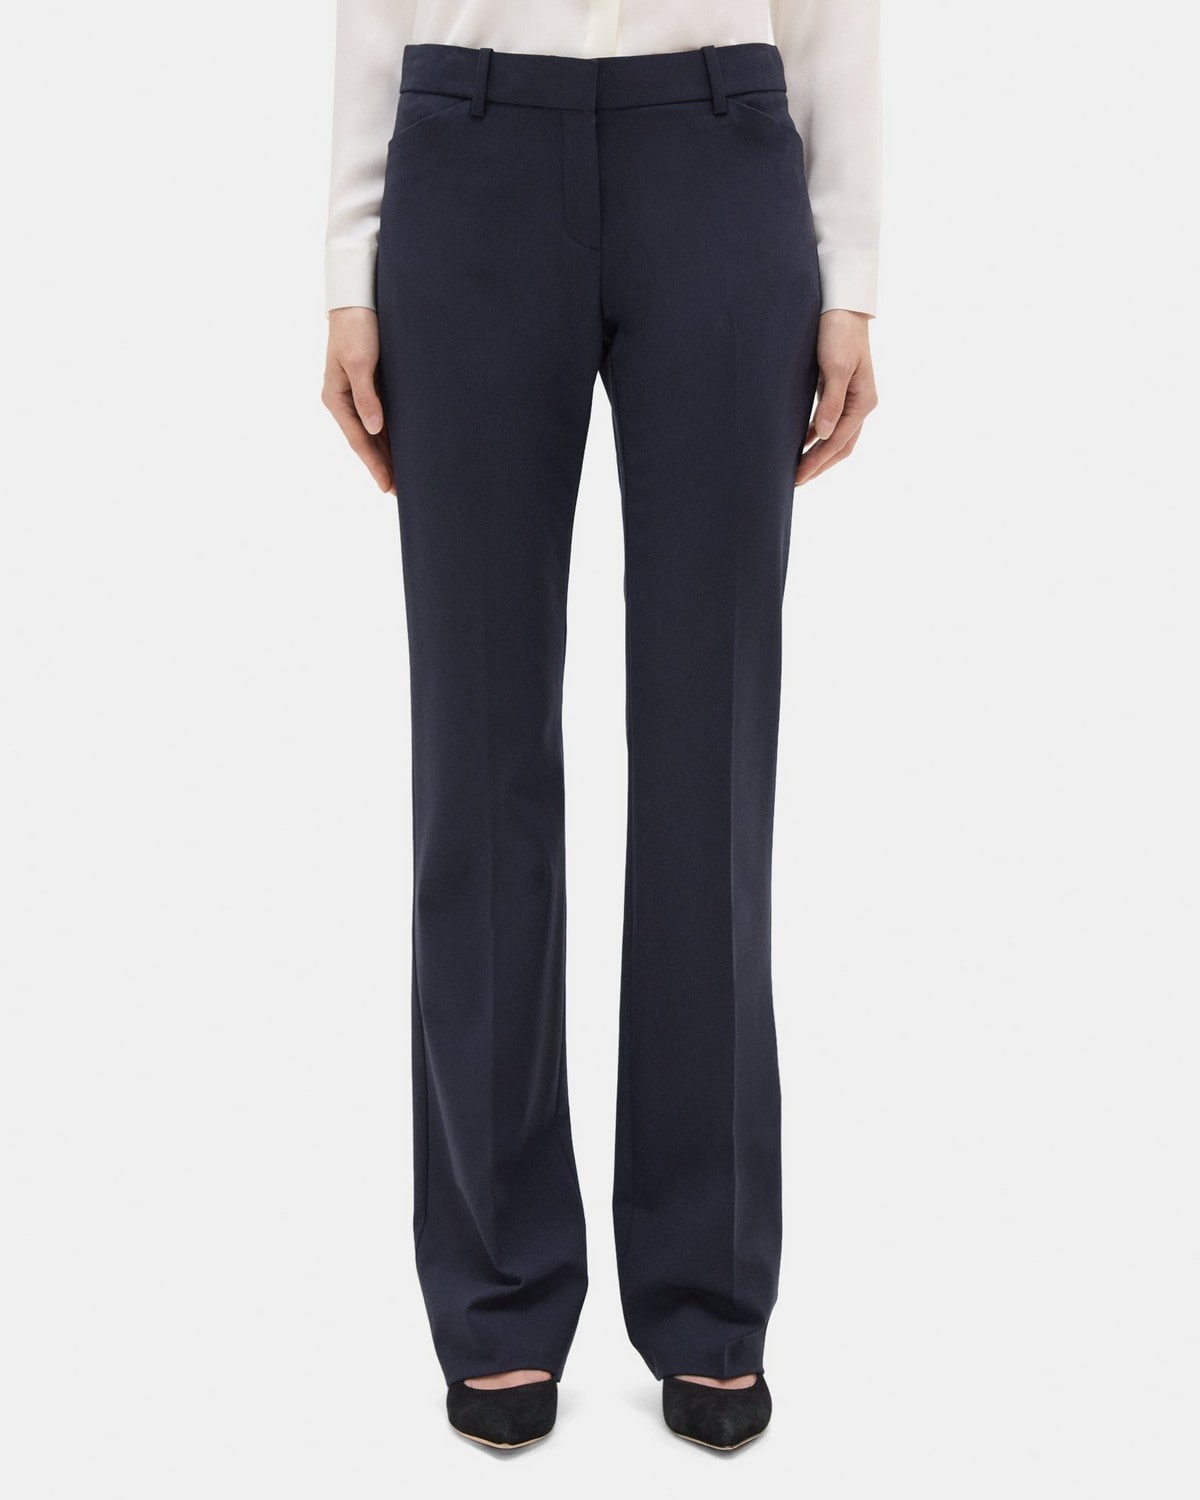 Sevona Stretch Wool Tailored Pant | Theory Outlet